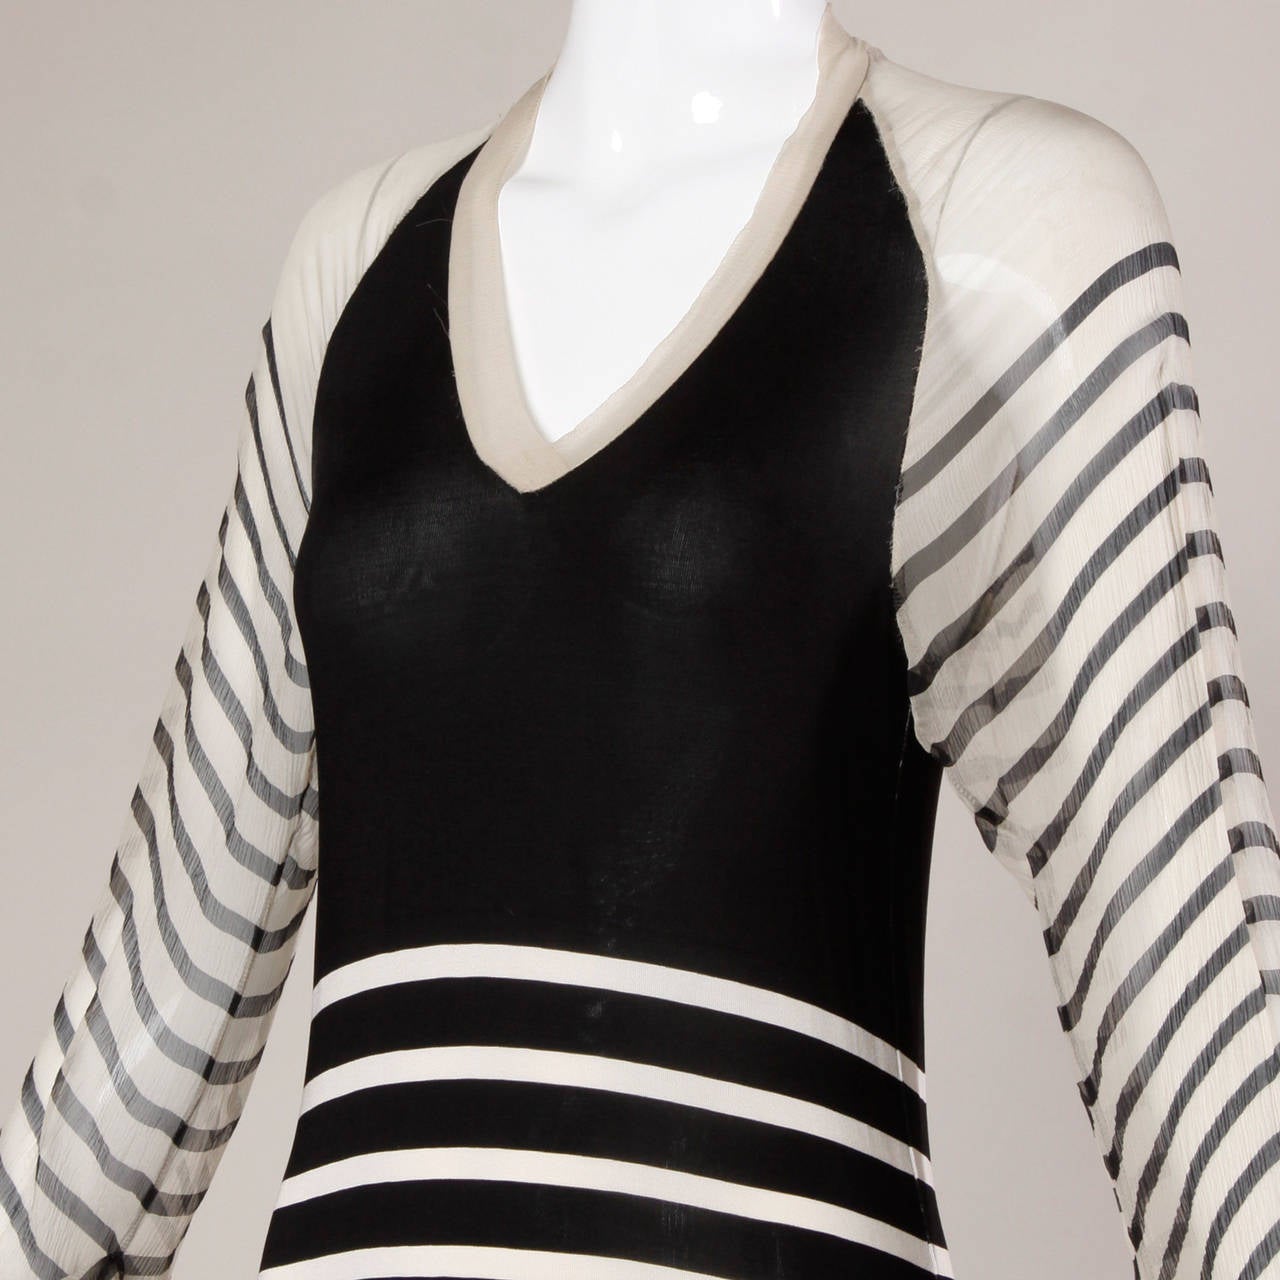 Delicate jersey knit dress with sheer silk chiffon sleeves by Jean Paul Gaultier. Black and off-white stripes.

Details:

Unlined
No Closure/ Fabric Contains Stretch
Marked Size: S
Color: Off White/ Black
Fabric: 100% Silk On Top/ 96% Rayon